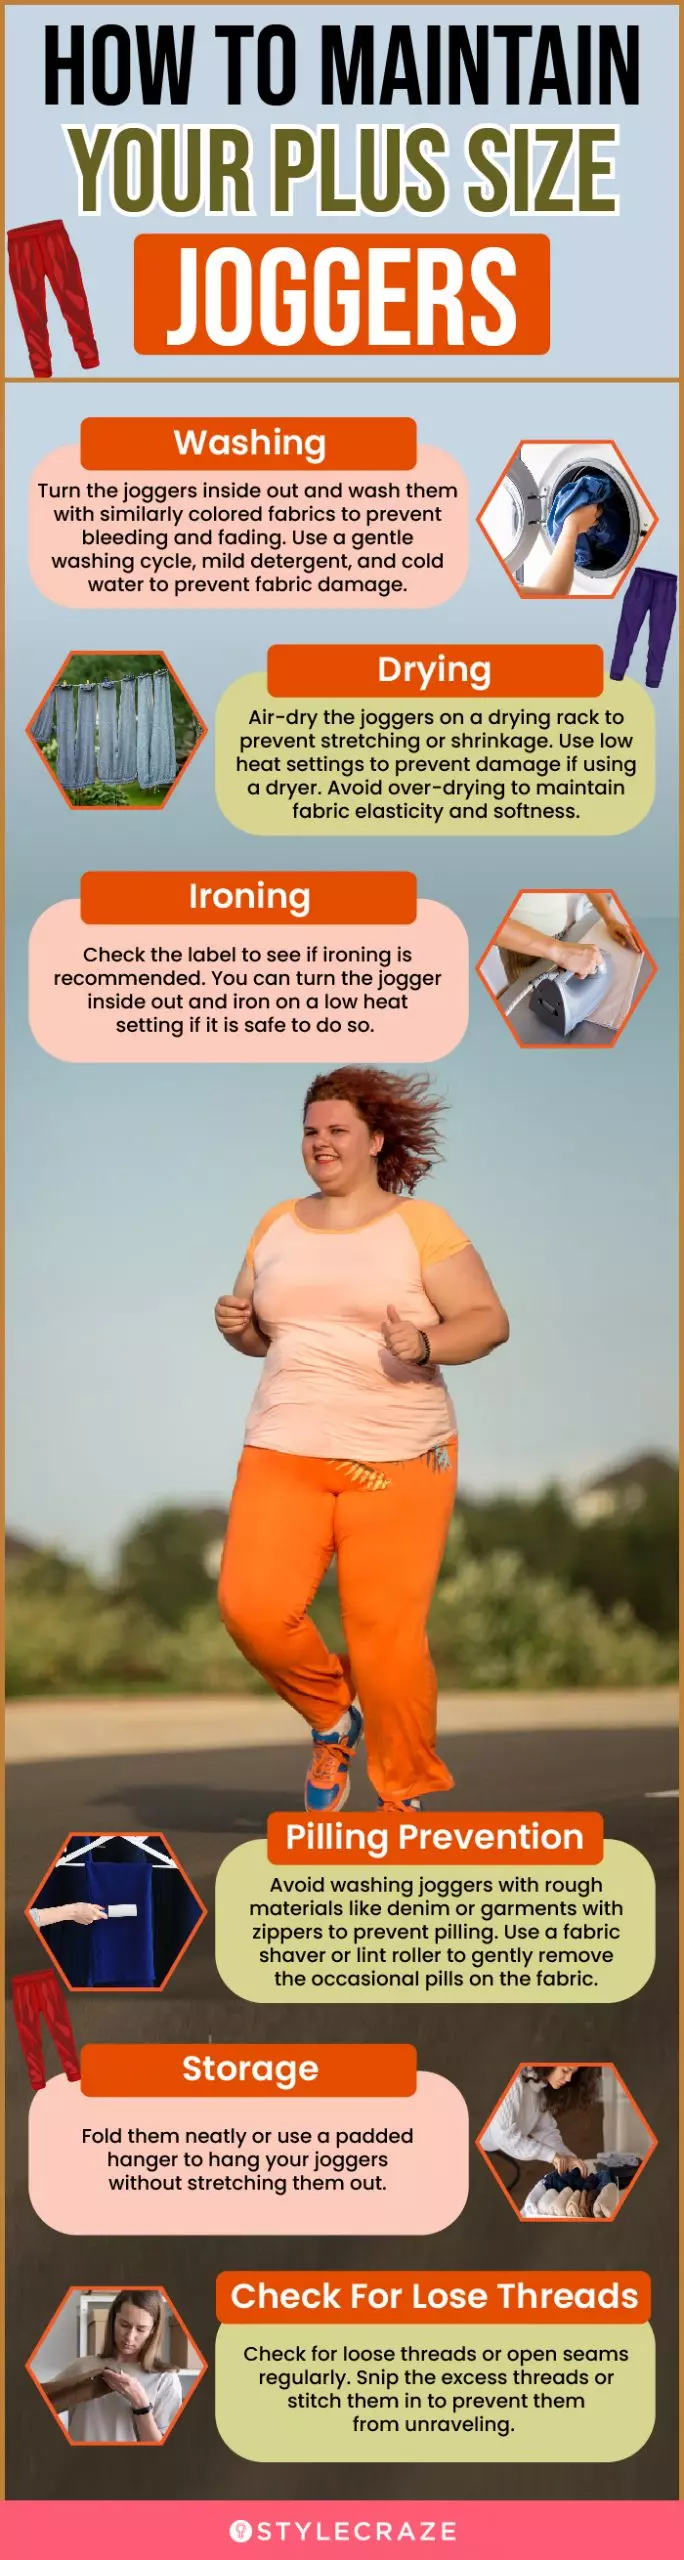 How To Maintain Your Plus Size Joggers (infographic)